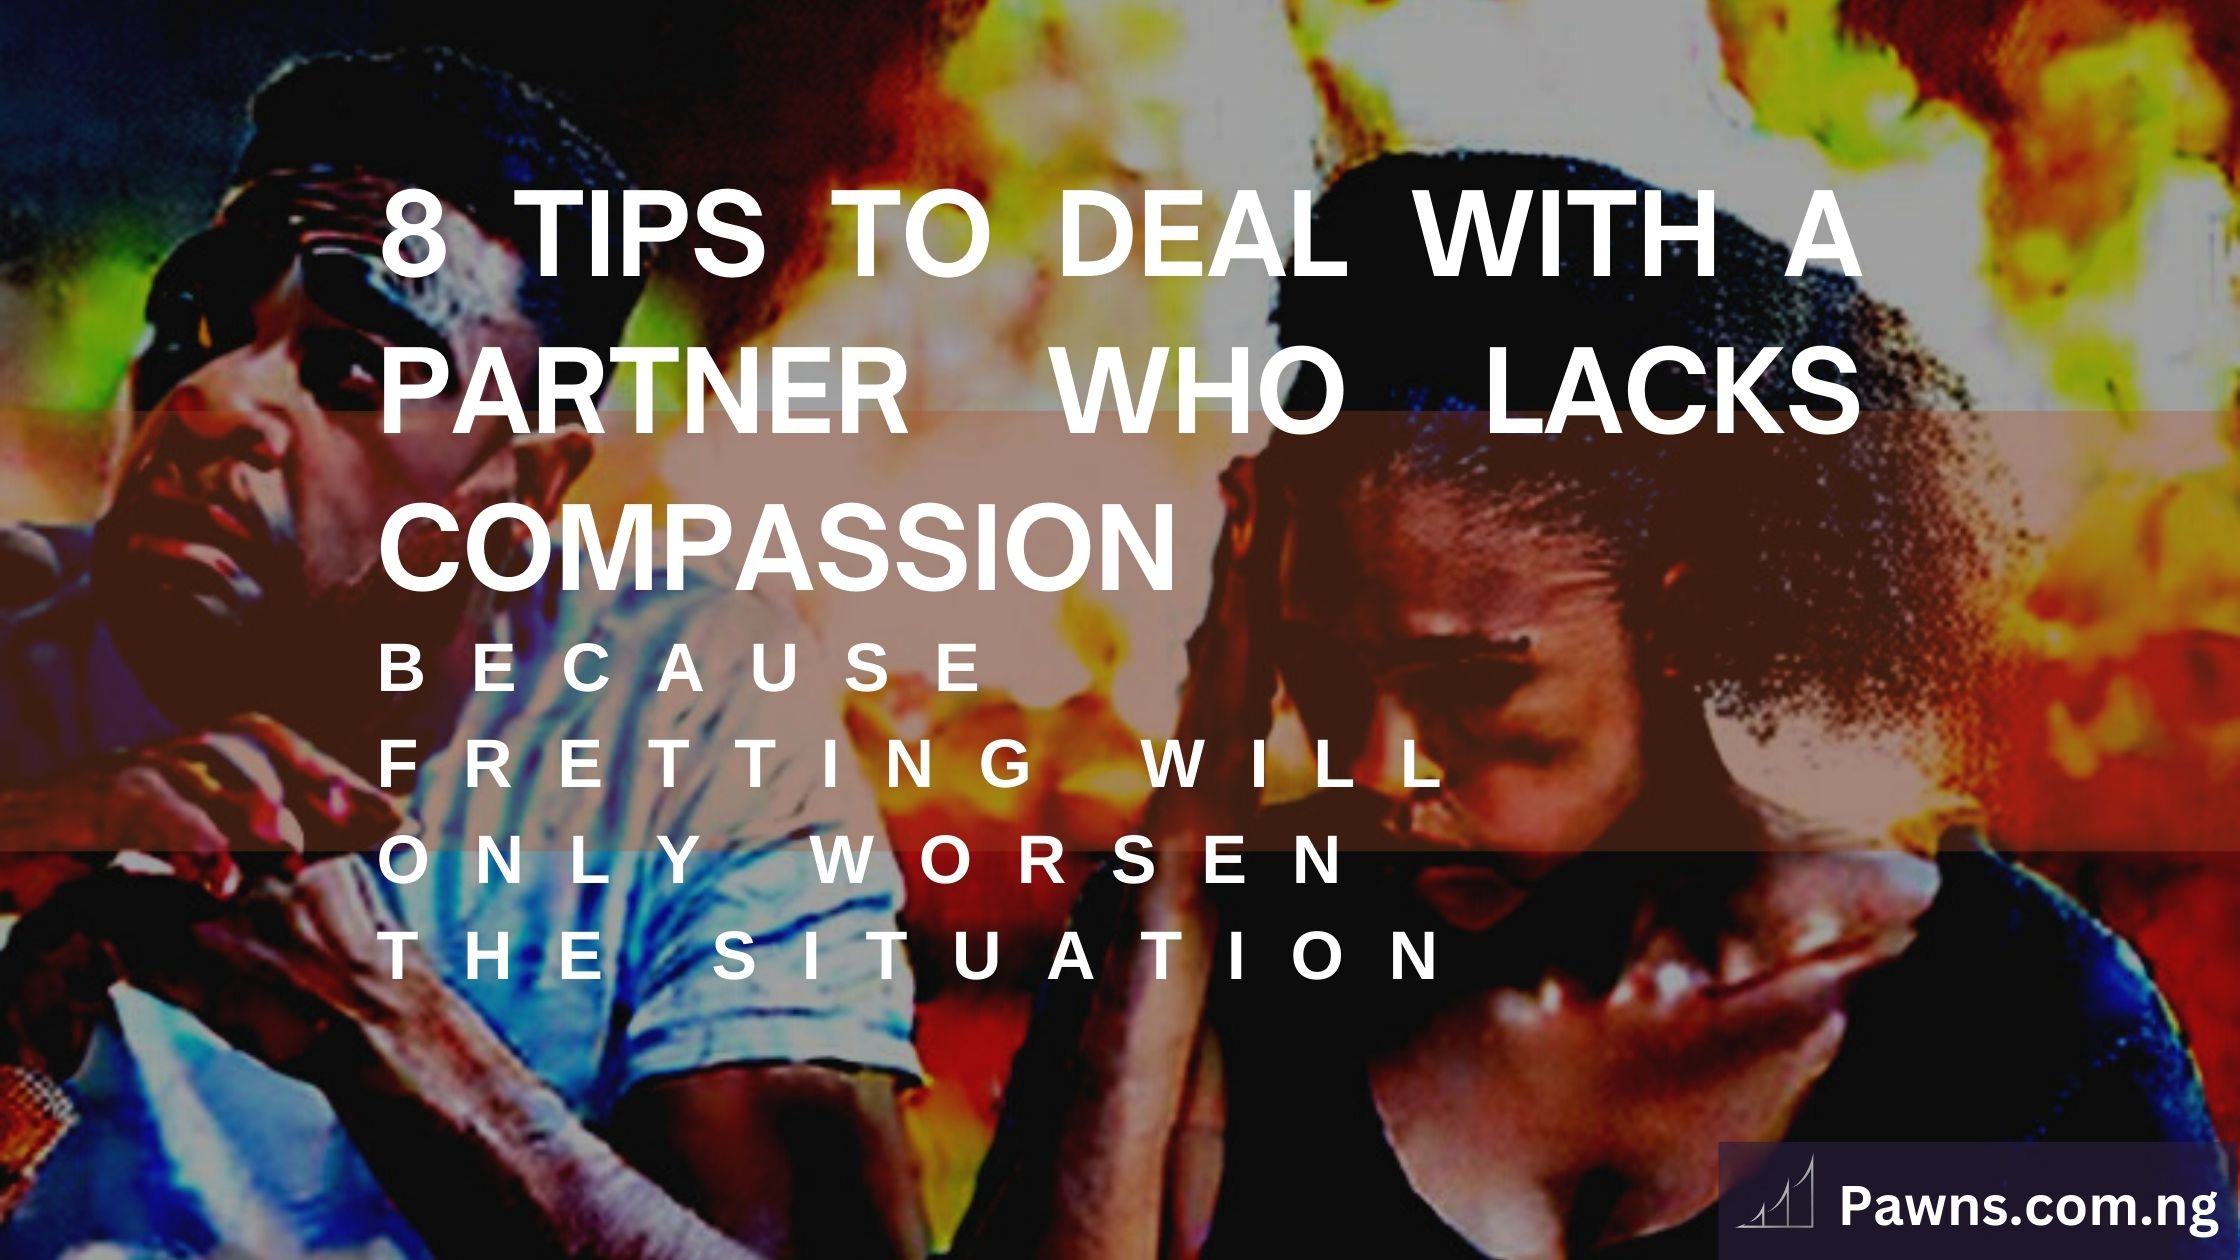 8 tips to deal with a partner who lacks compassion in a relationship